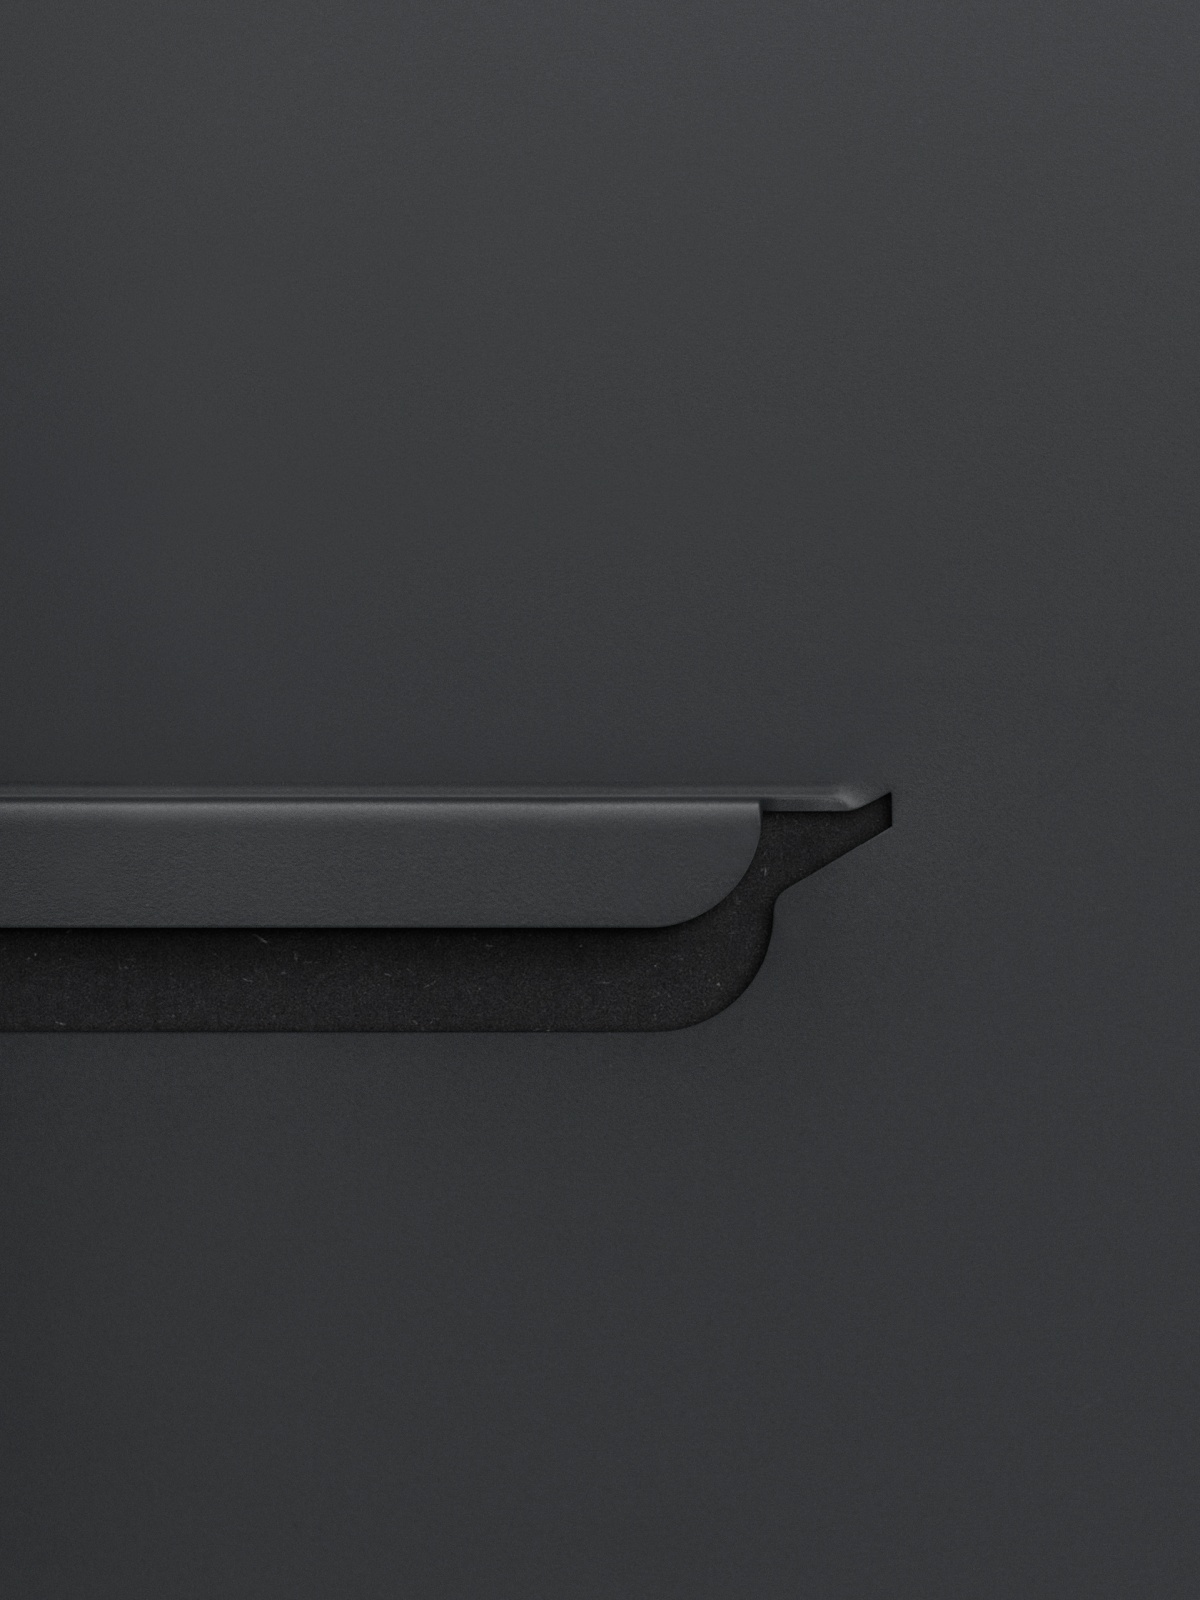 FOLD Aluminum handles in the color 'Anthracite'